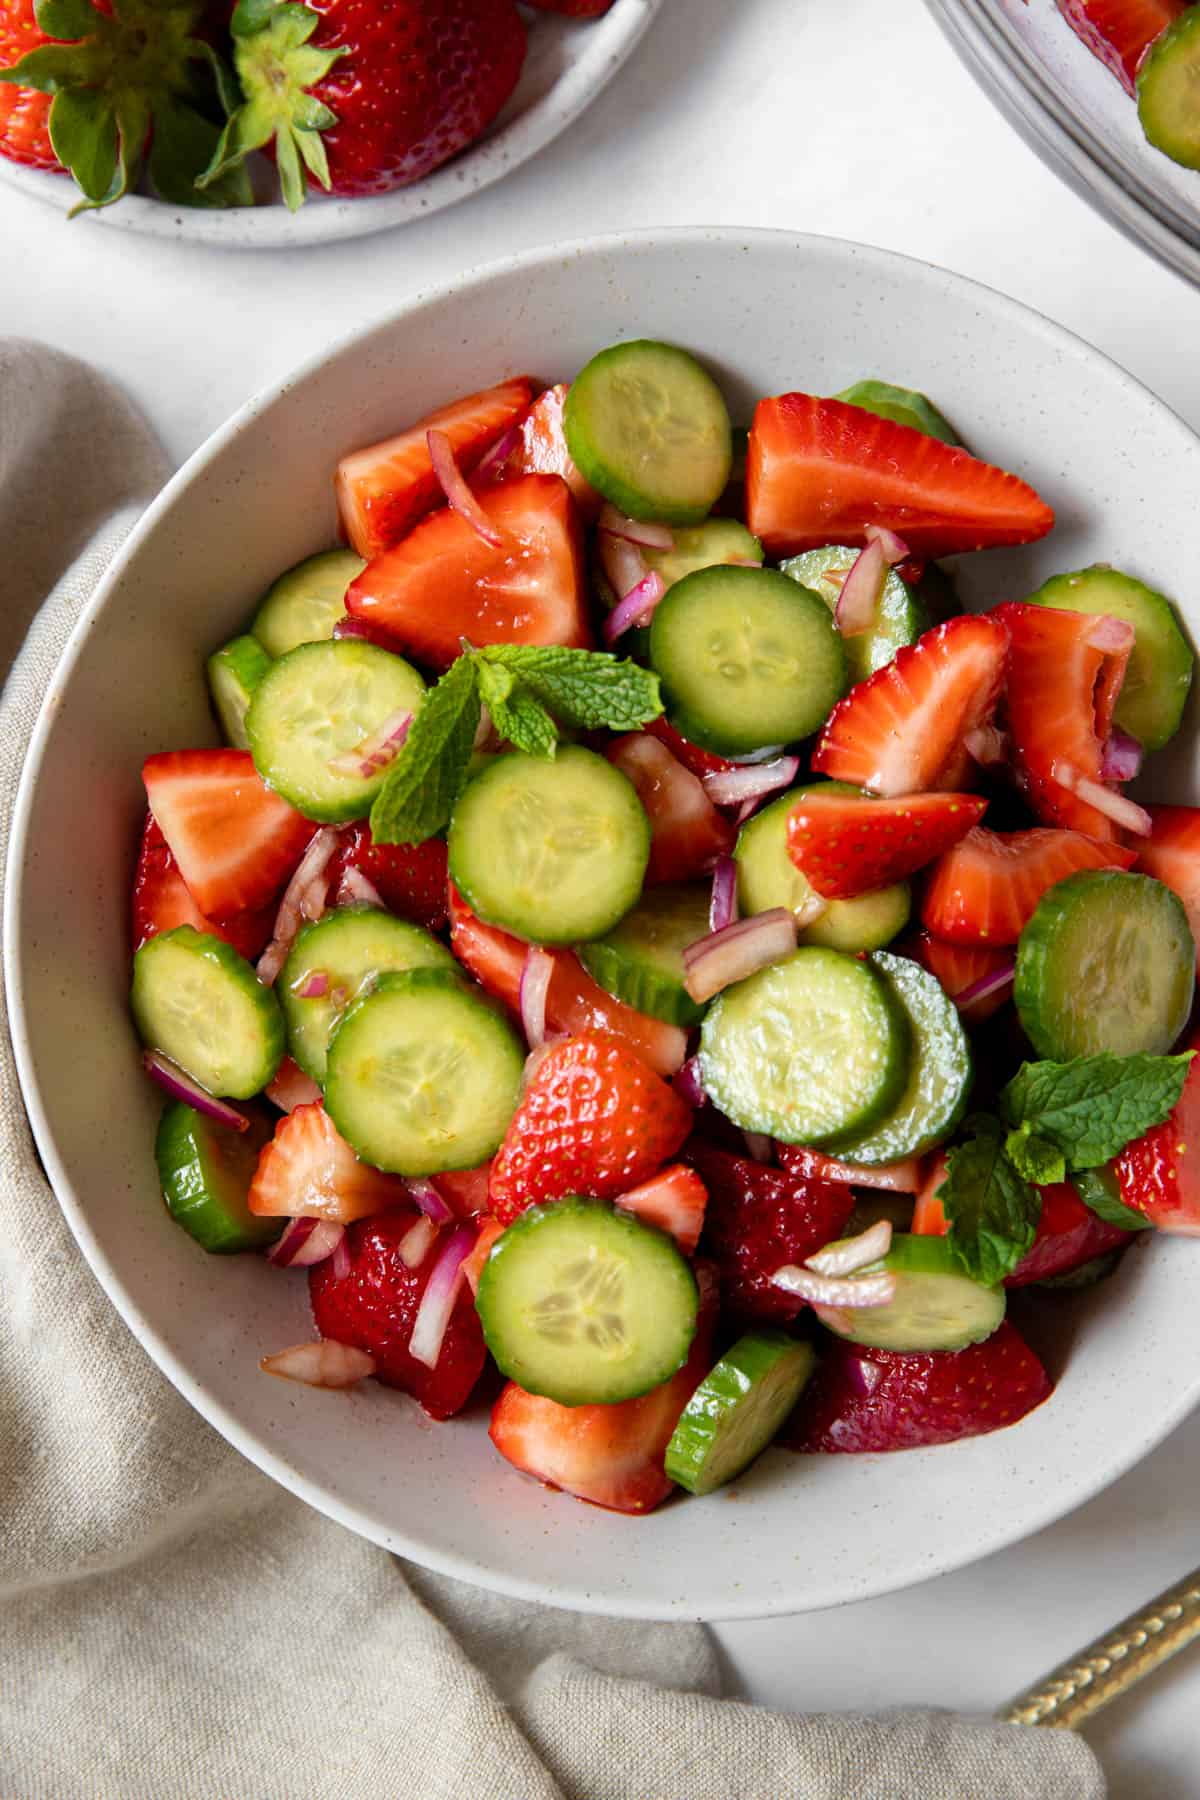 A white bowl filled with strawberry and cucumber salad that is garnished with mint. The bowl sits on a white countertop ready for serving.